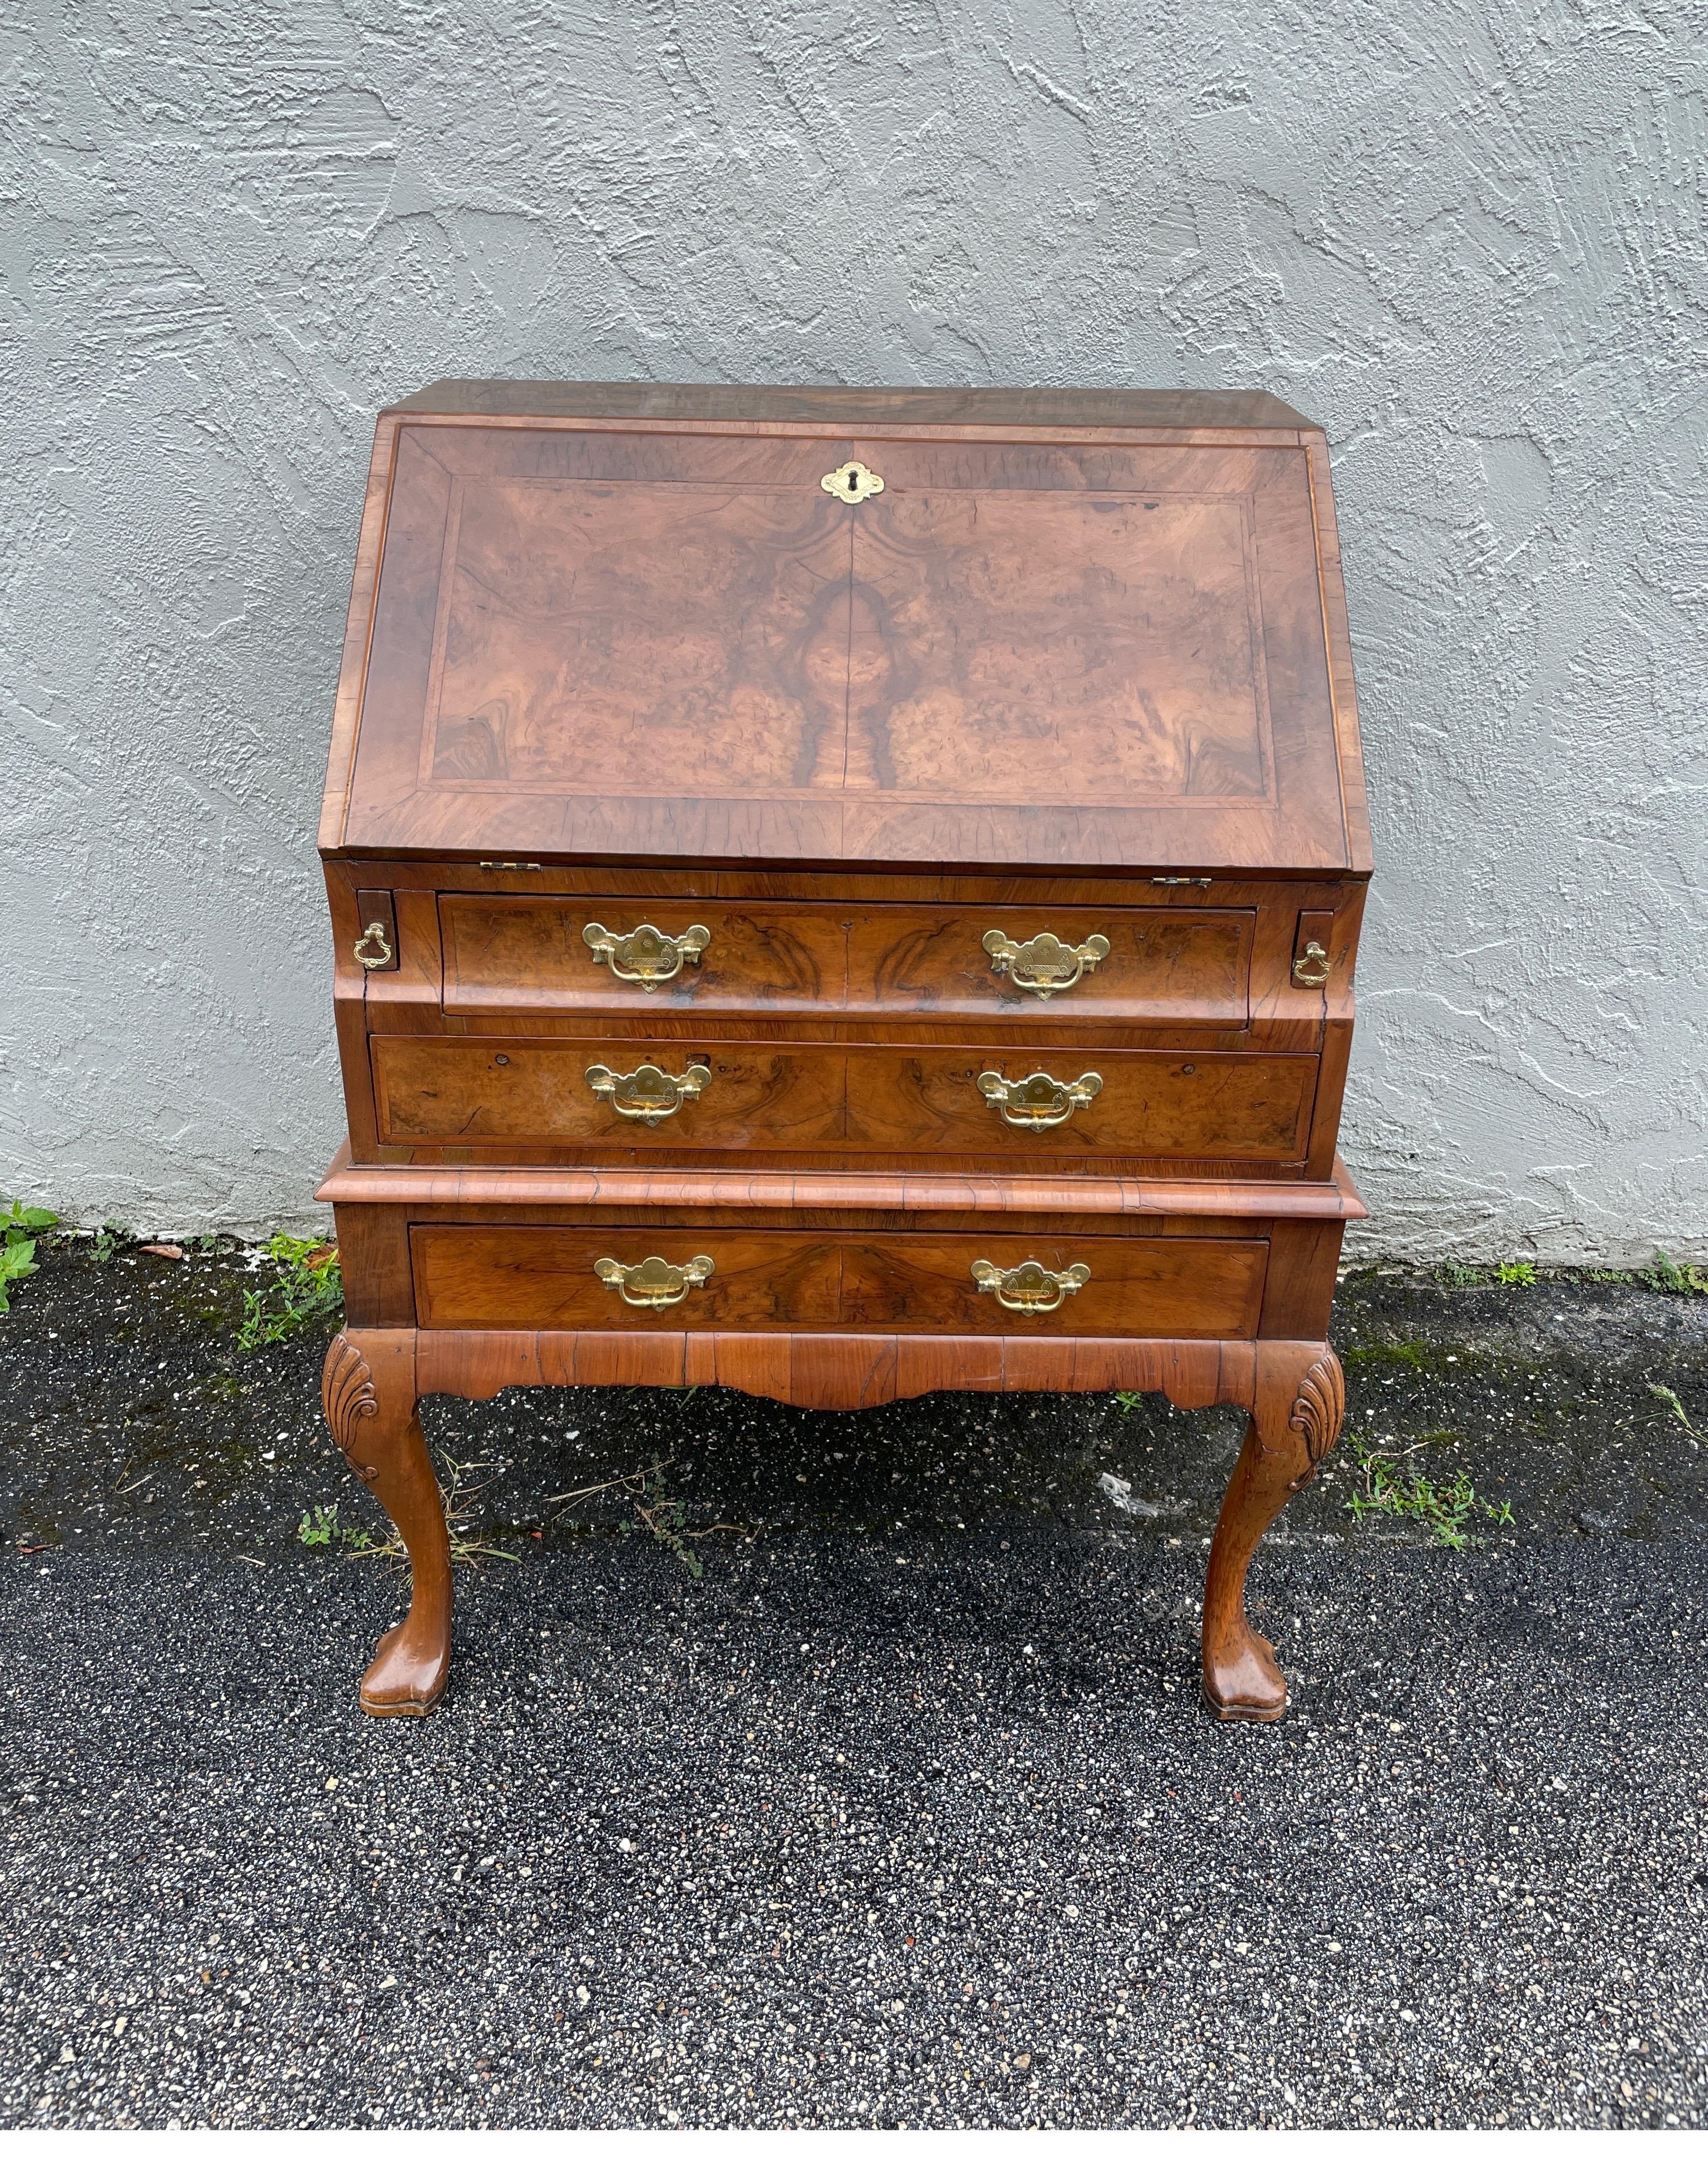 Late 19th century English Queen Anne style slant front desk with three drawers & inner compartments.